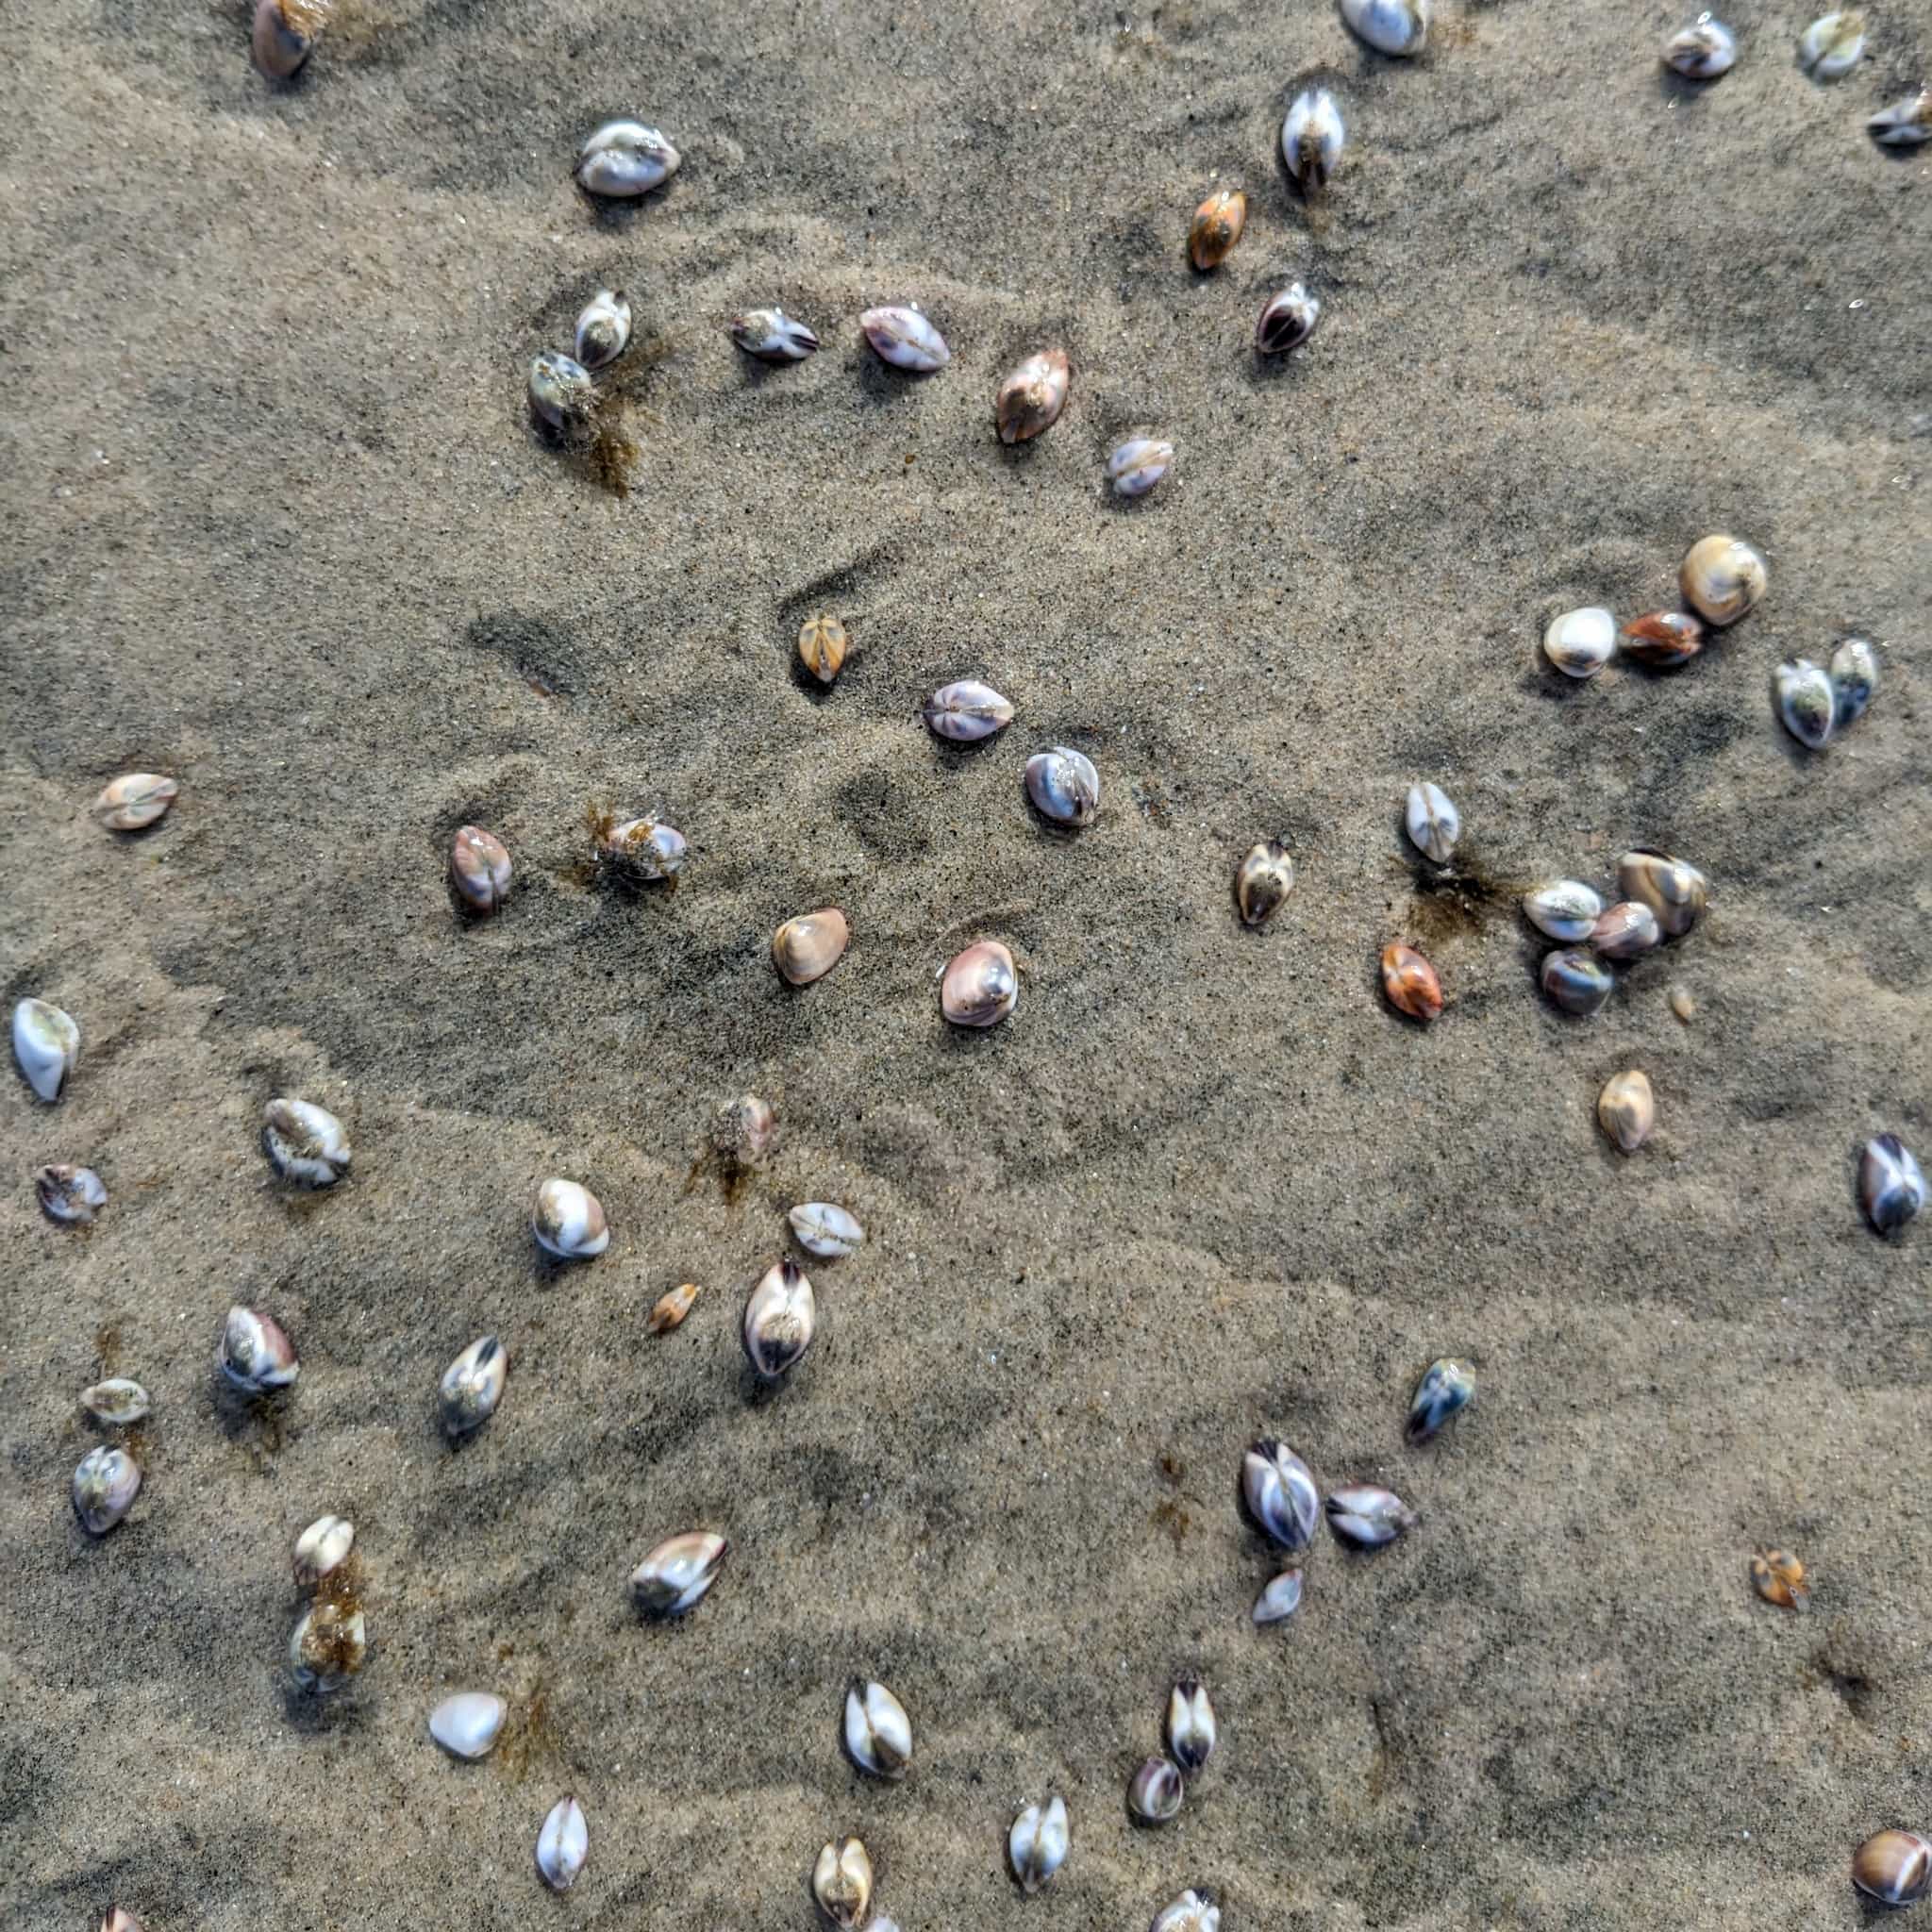 Small shells scattered in the sand.